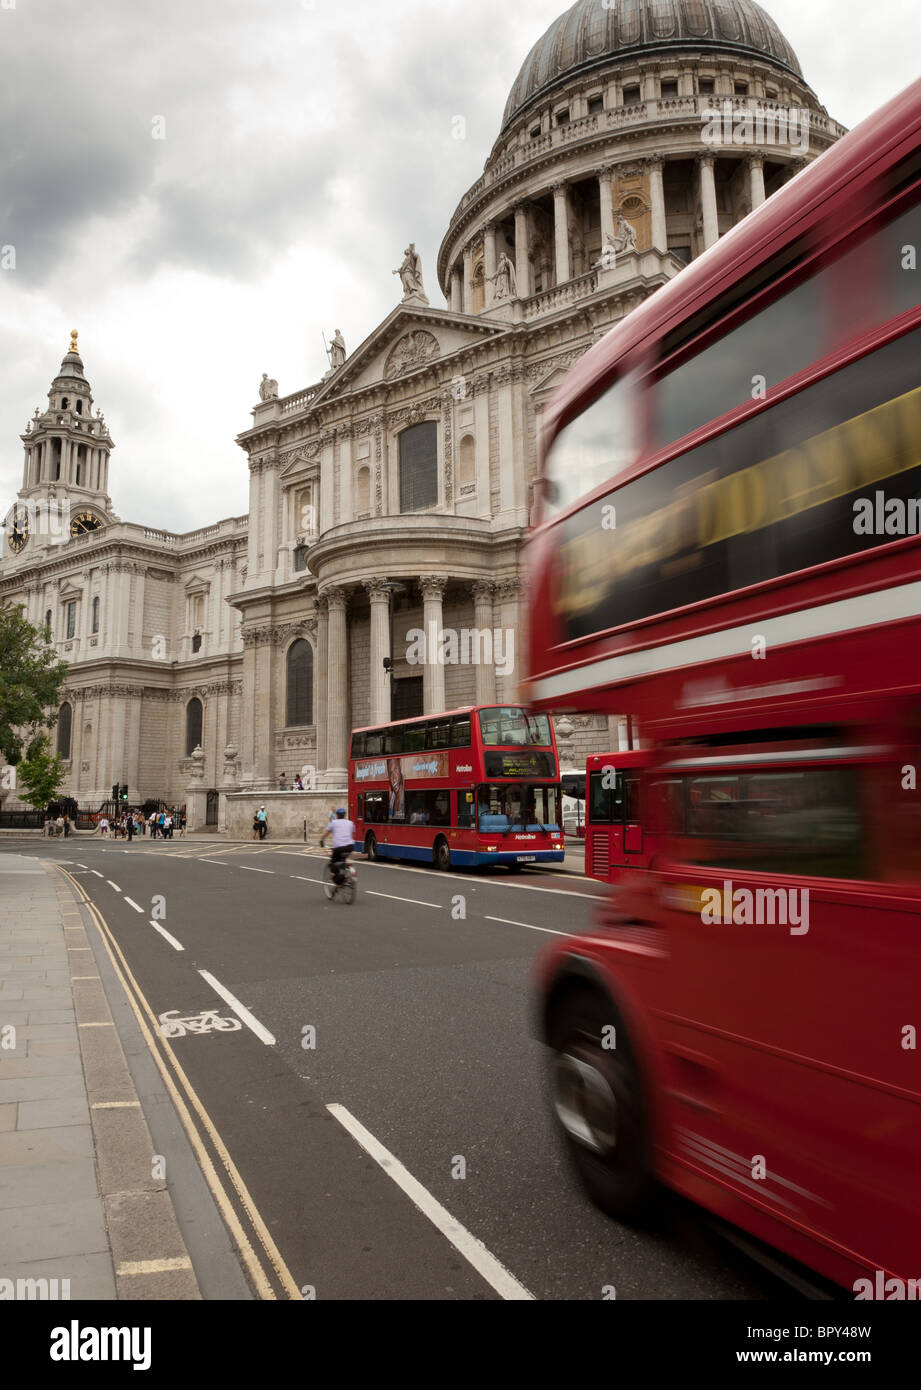 London routemaster bus passing St Paul's cathedral, London Stock Photo